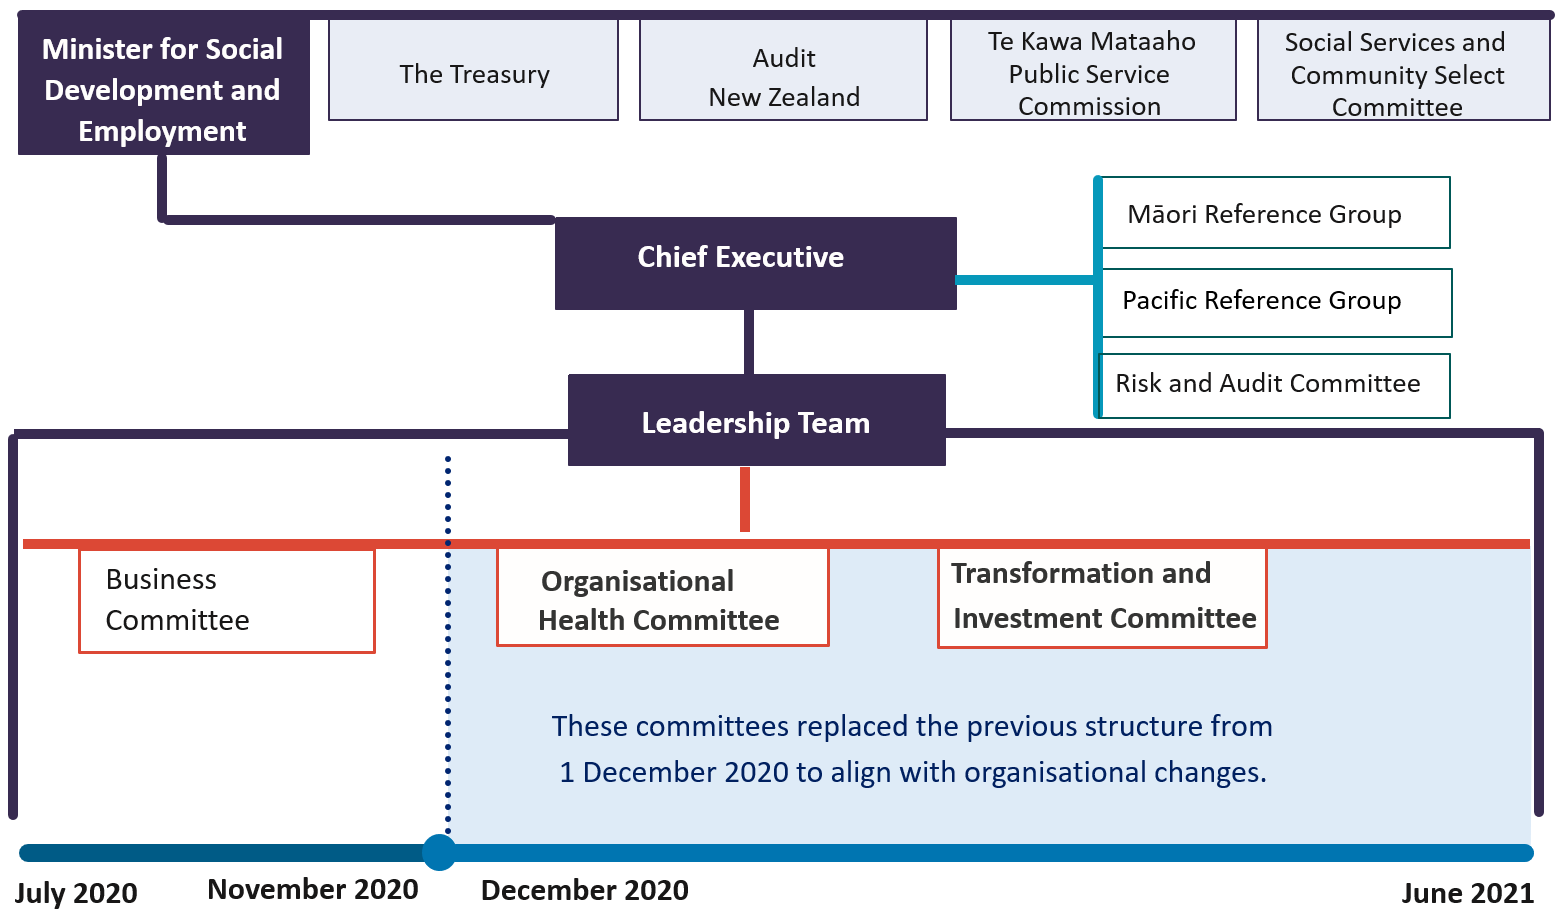 •	The Business Committee is disestablished in November 2020 and replaced by the Organisational Health Committee and the Transformation and Investment Committee.